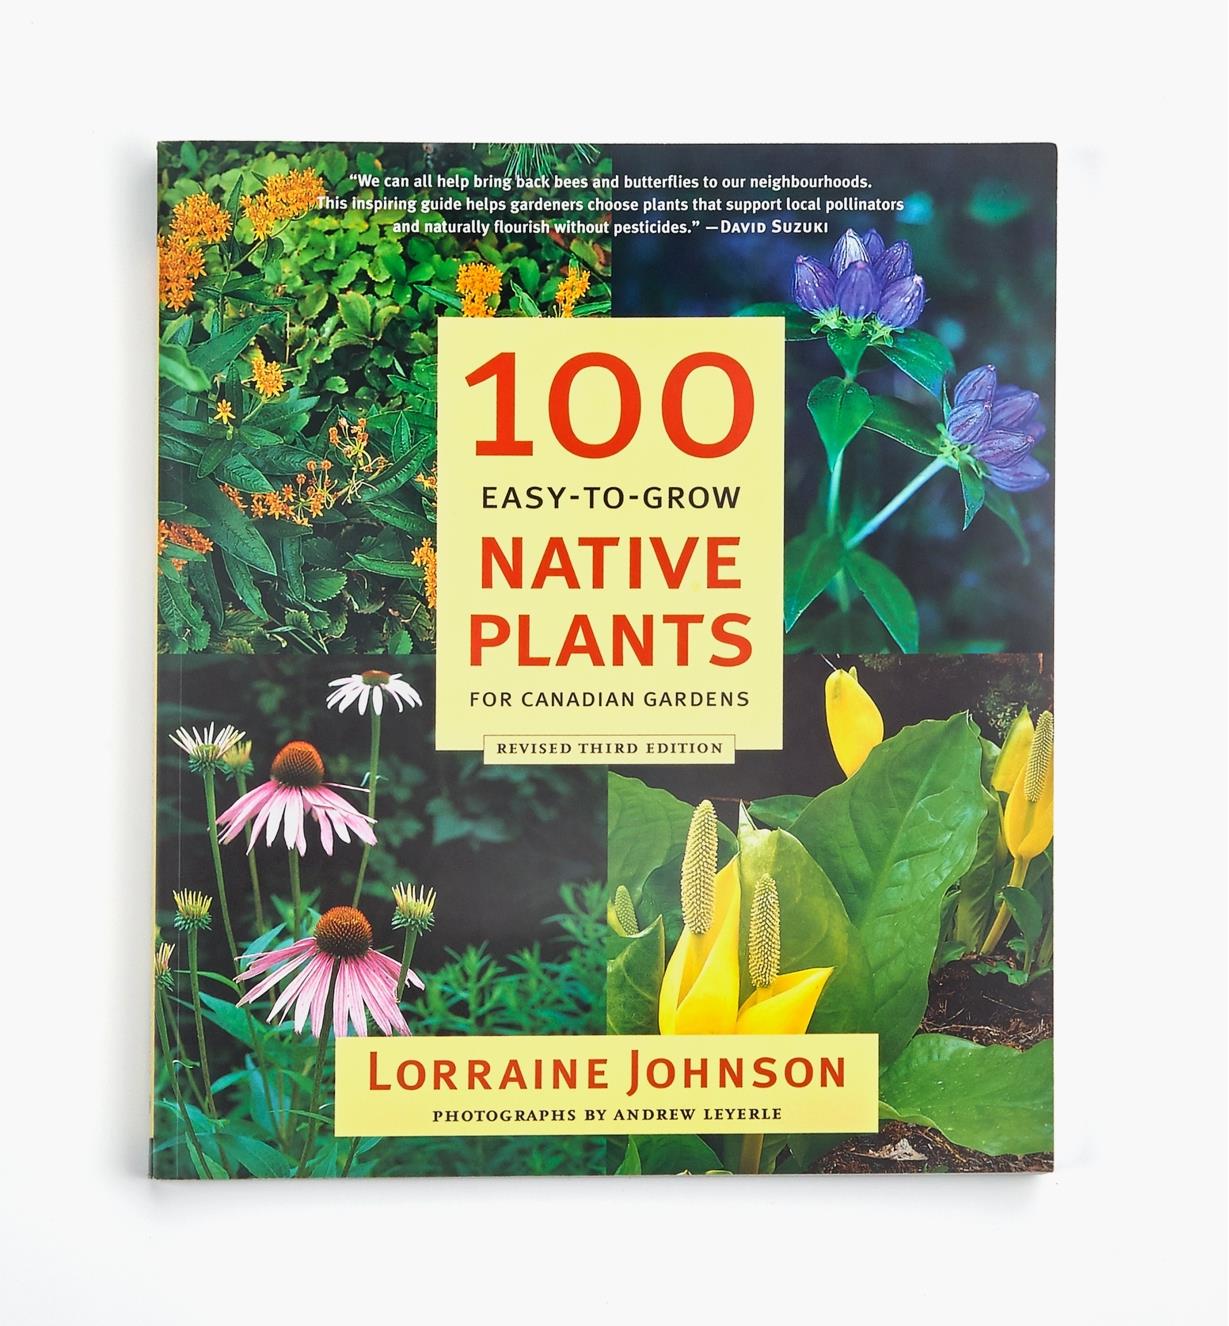 LA975 - 100 Easy-To-Grow Native Plants for Canadian Gardens, Revised 3rd Edition